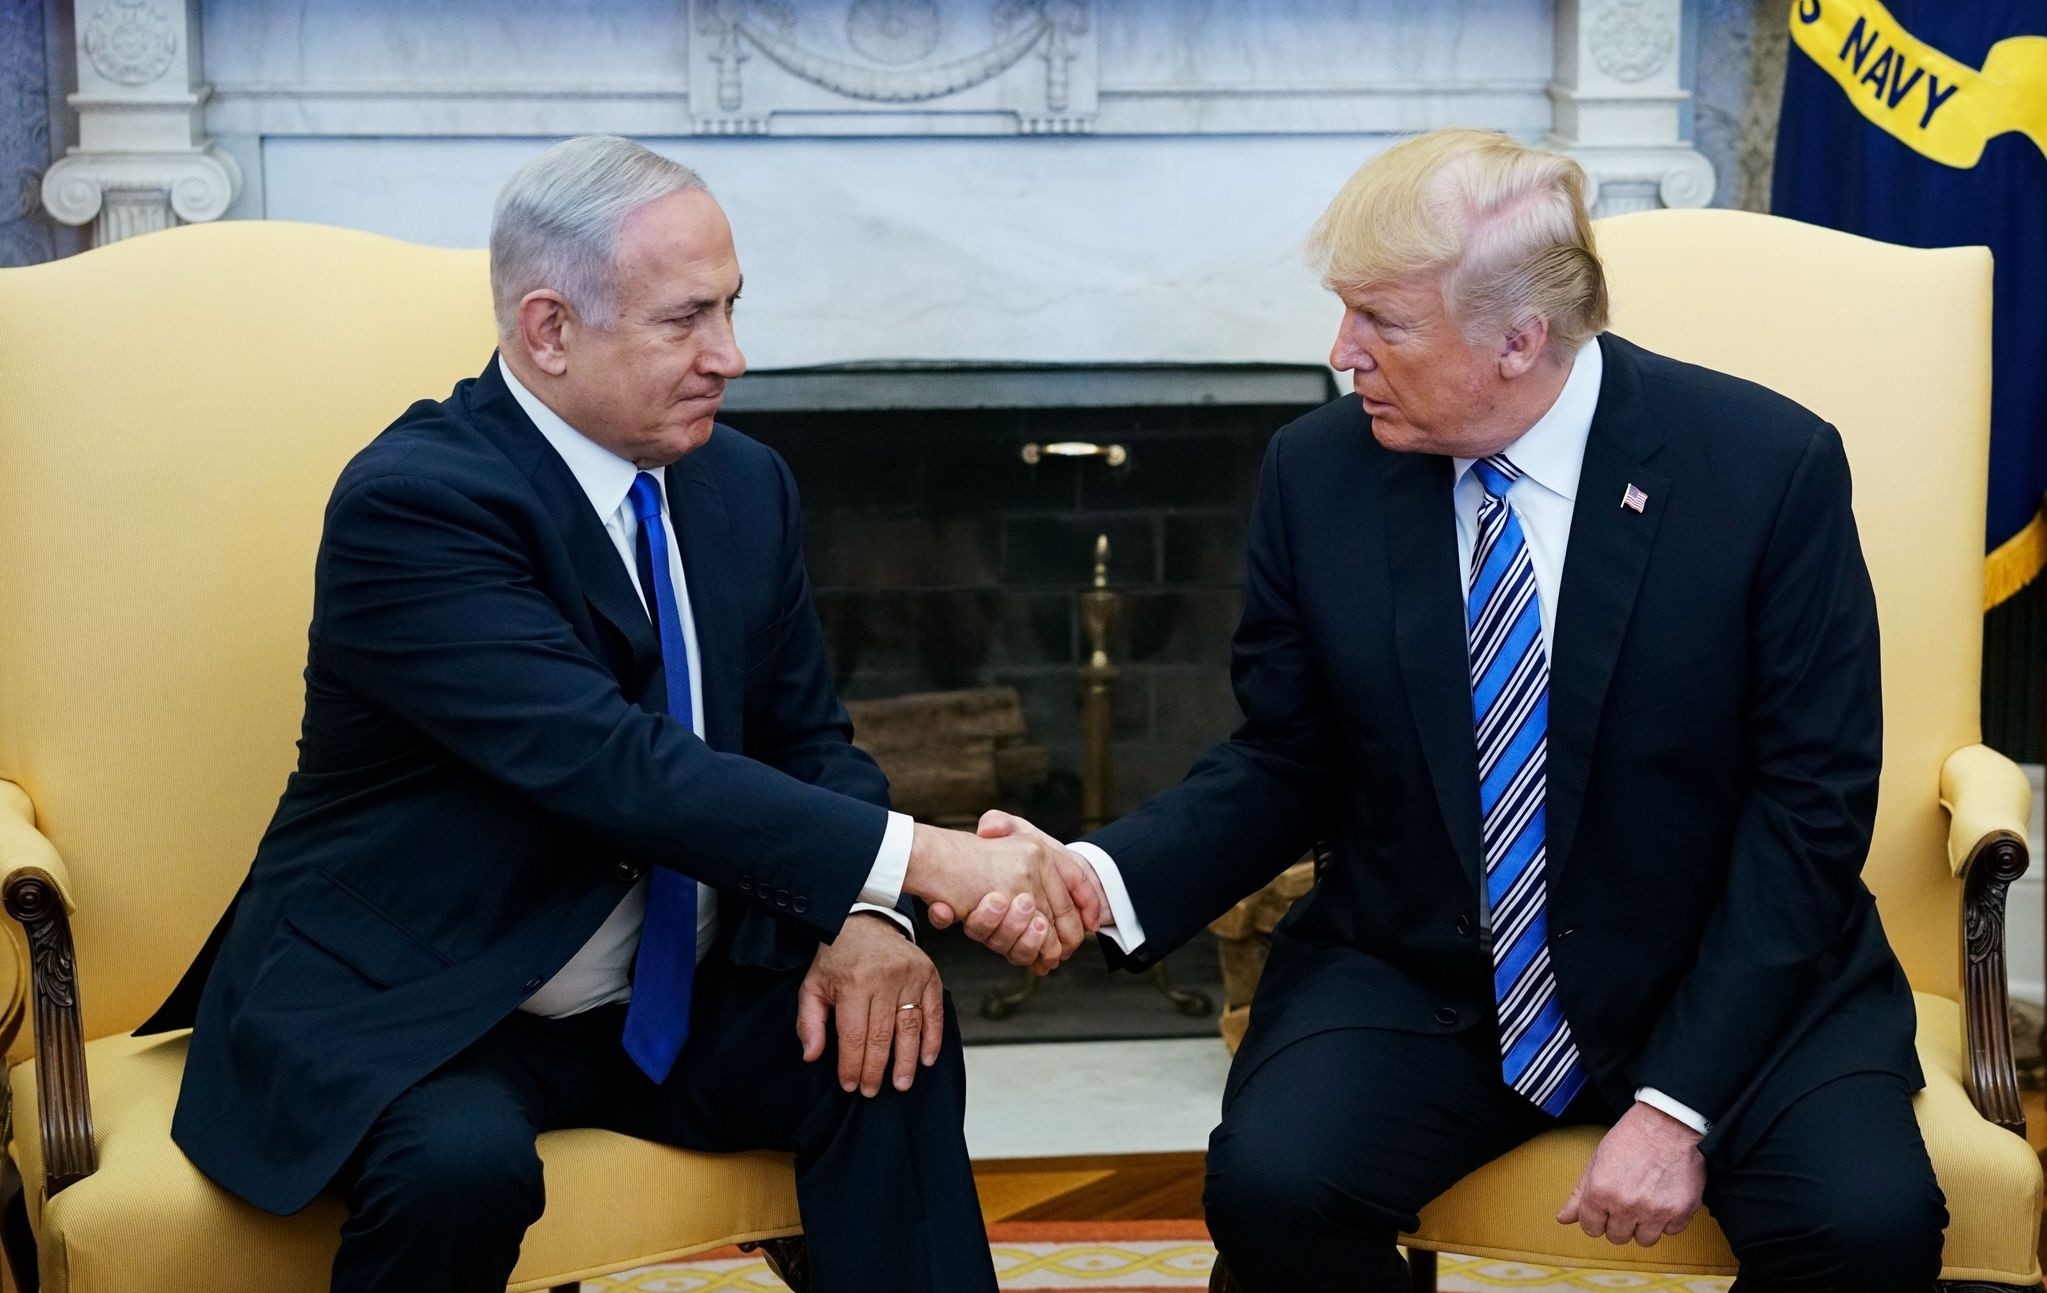 Donald Trump shakes hands with Israel's Prime Minister Benjamin Netanyahu in the Oval Office of the White House (AFP Photo)